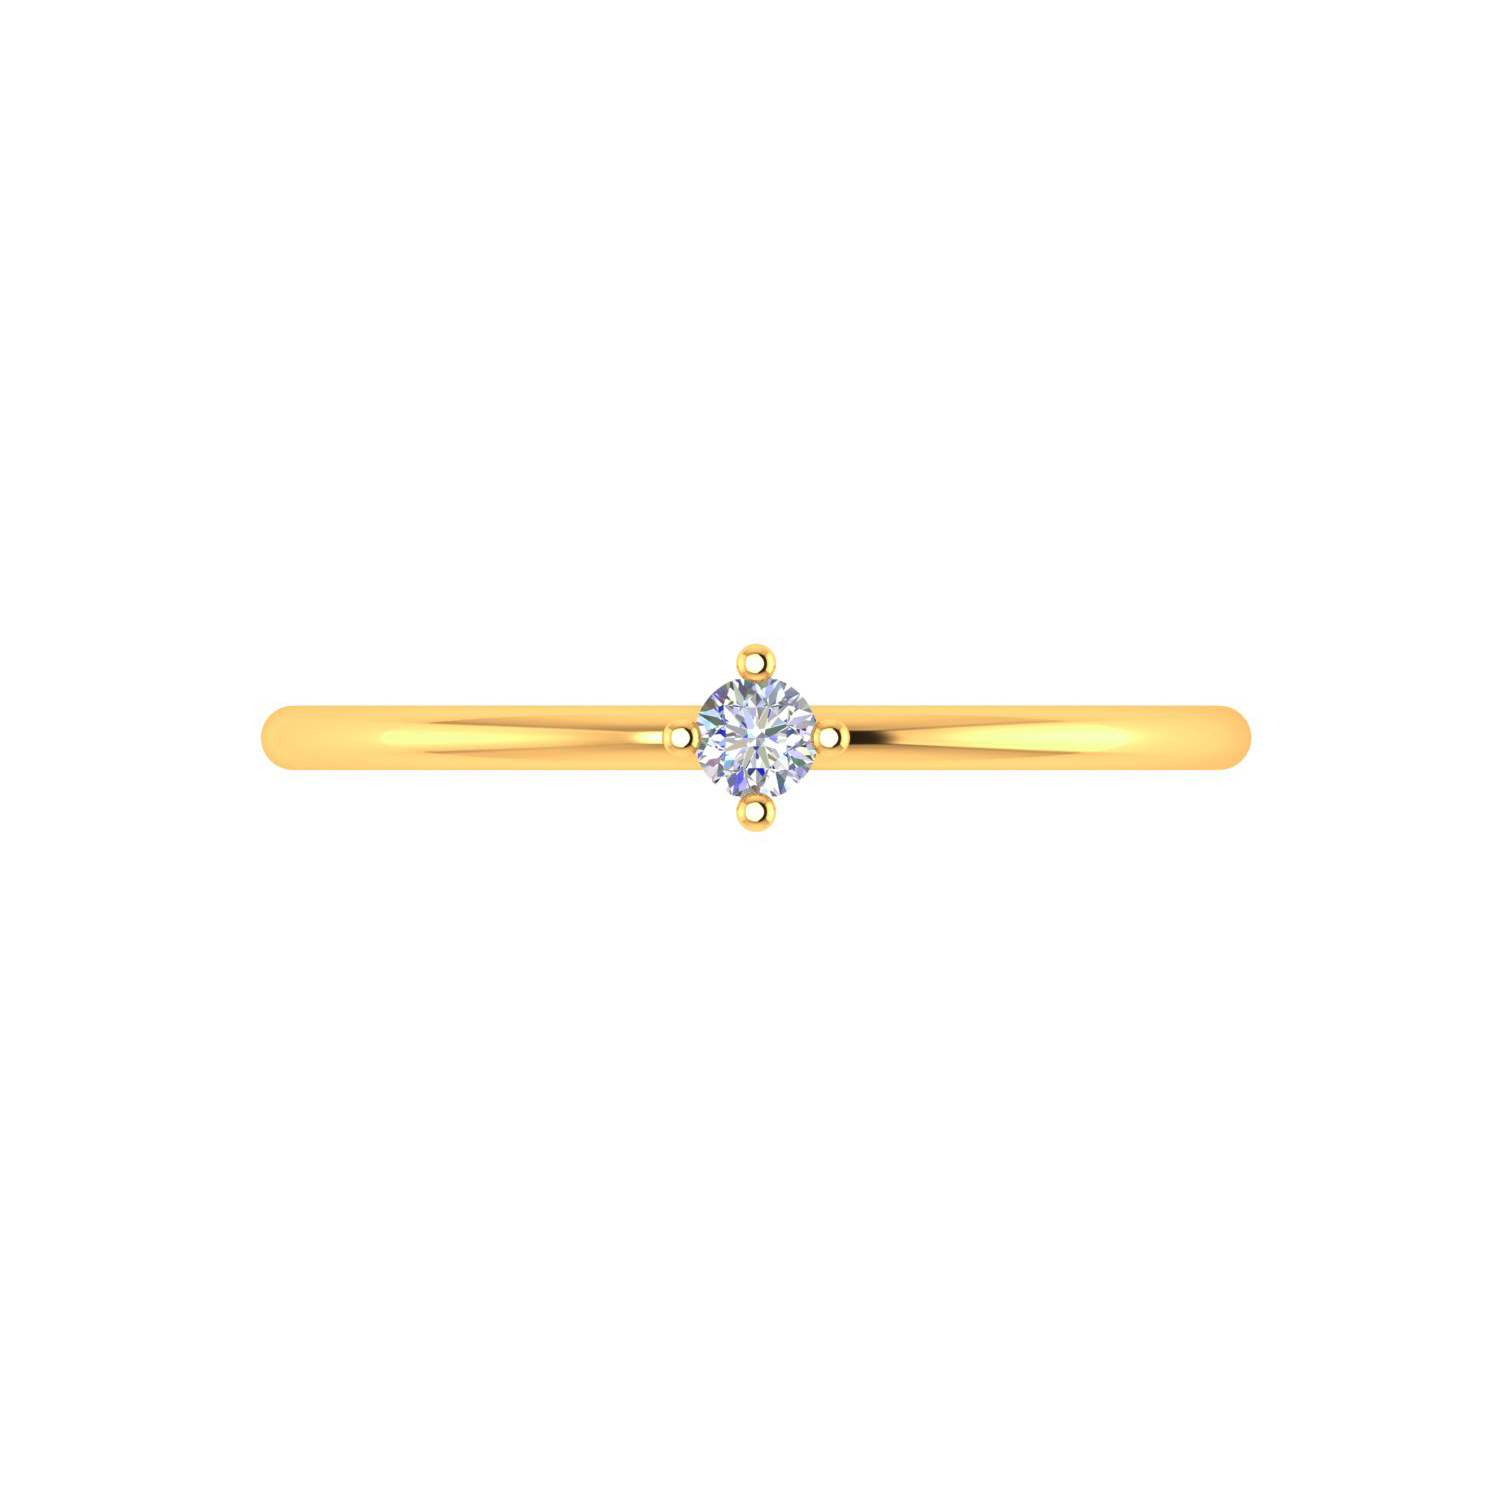 Certified Diamond Solid Gold Solitaire Ring